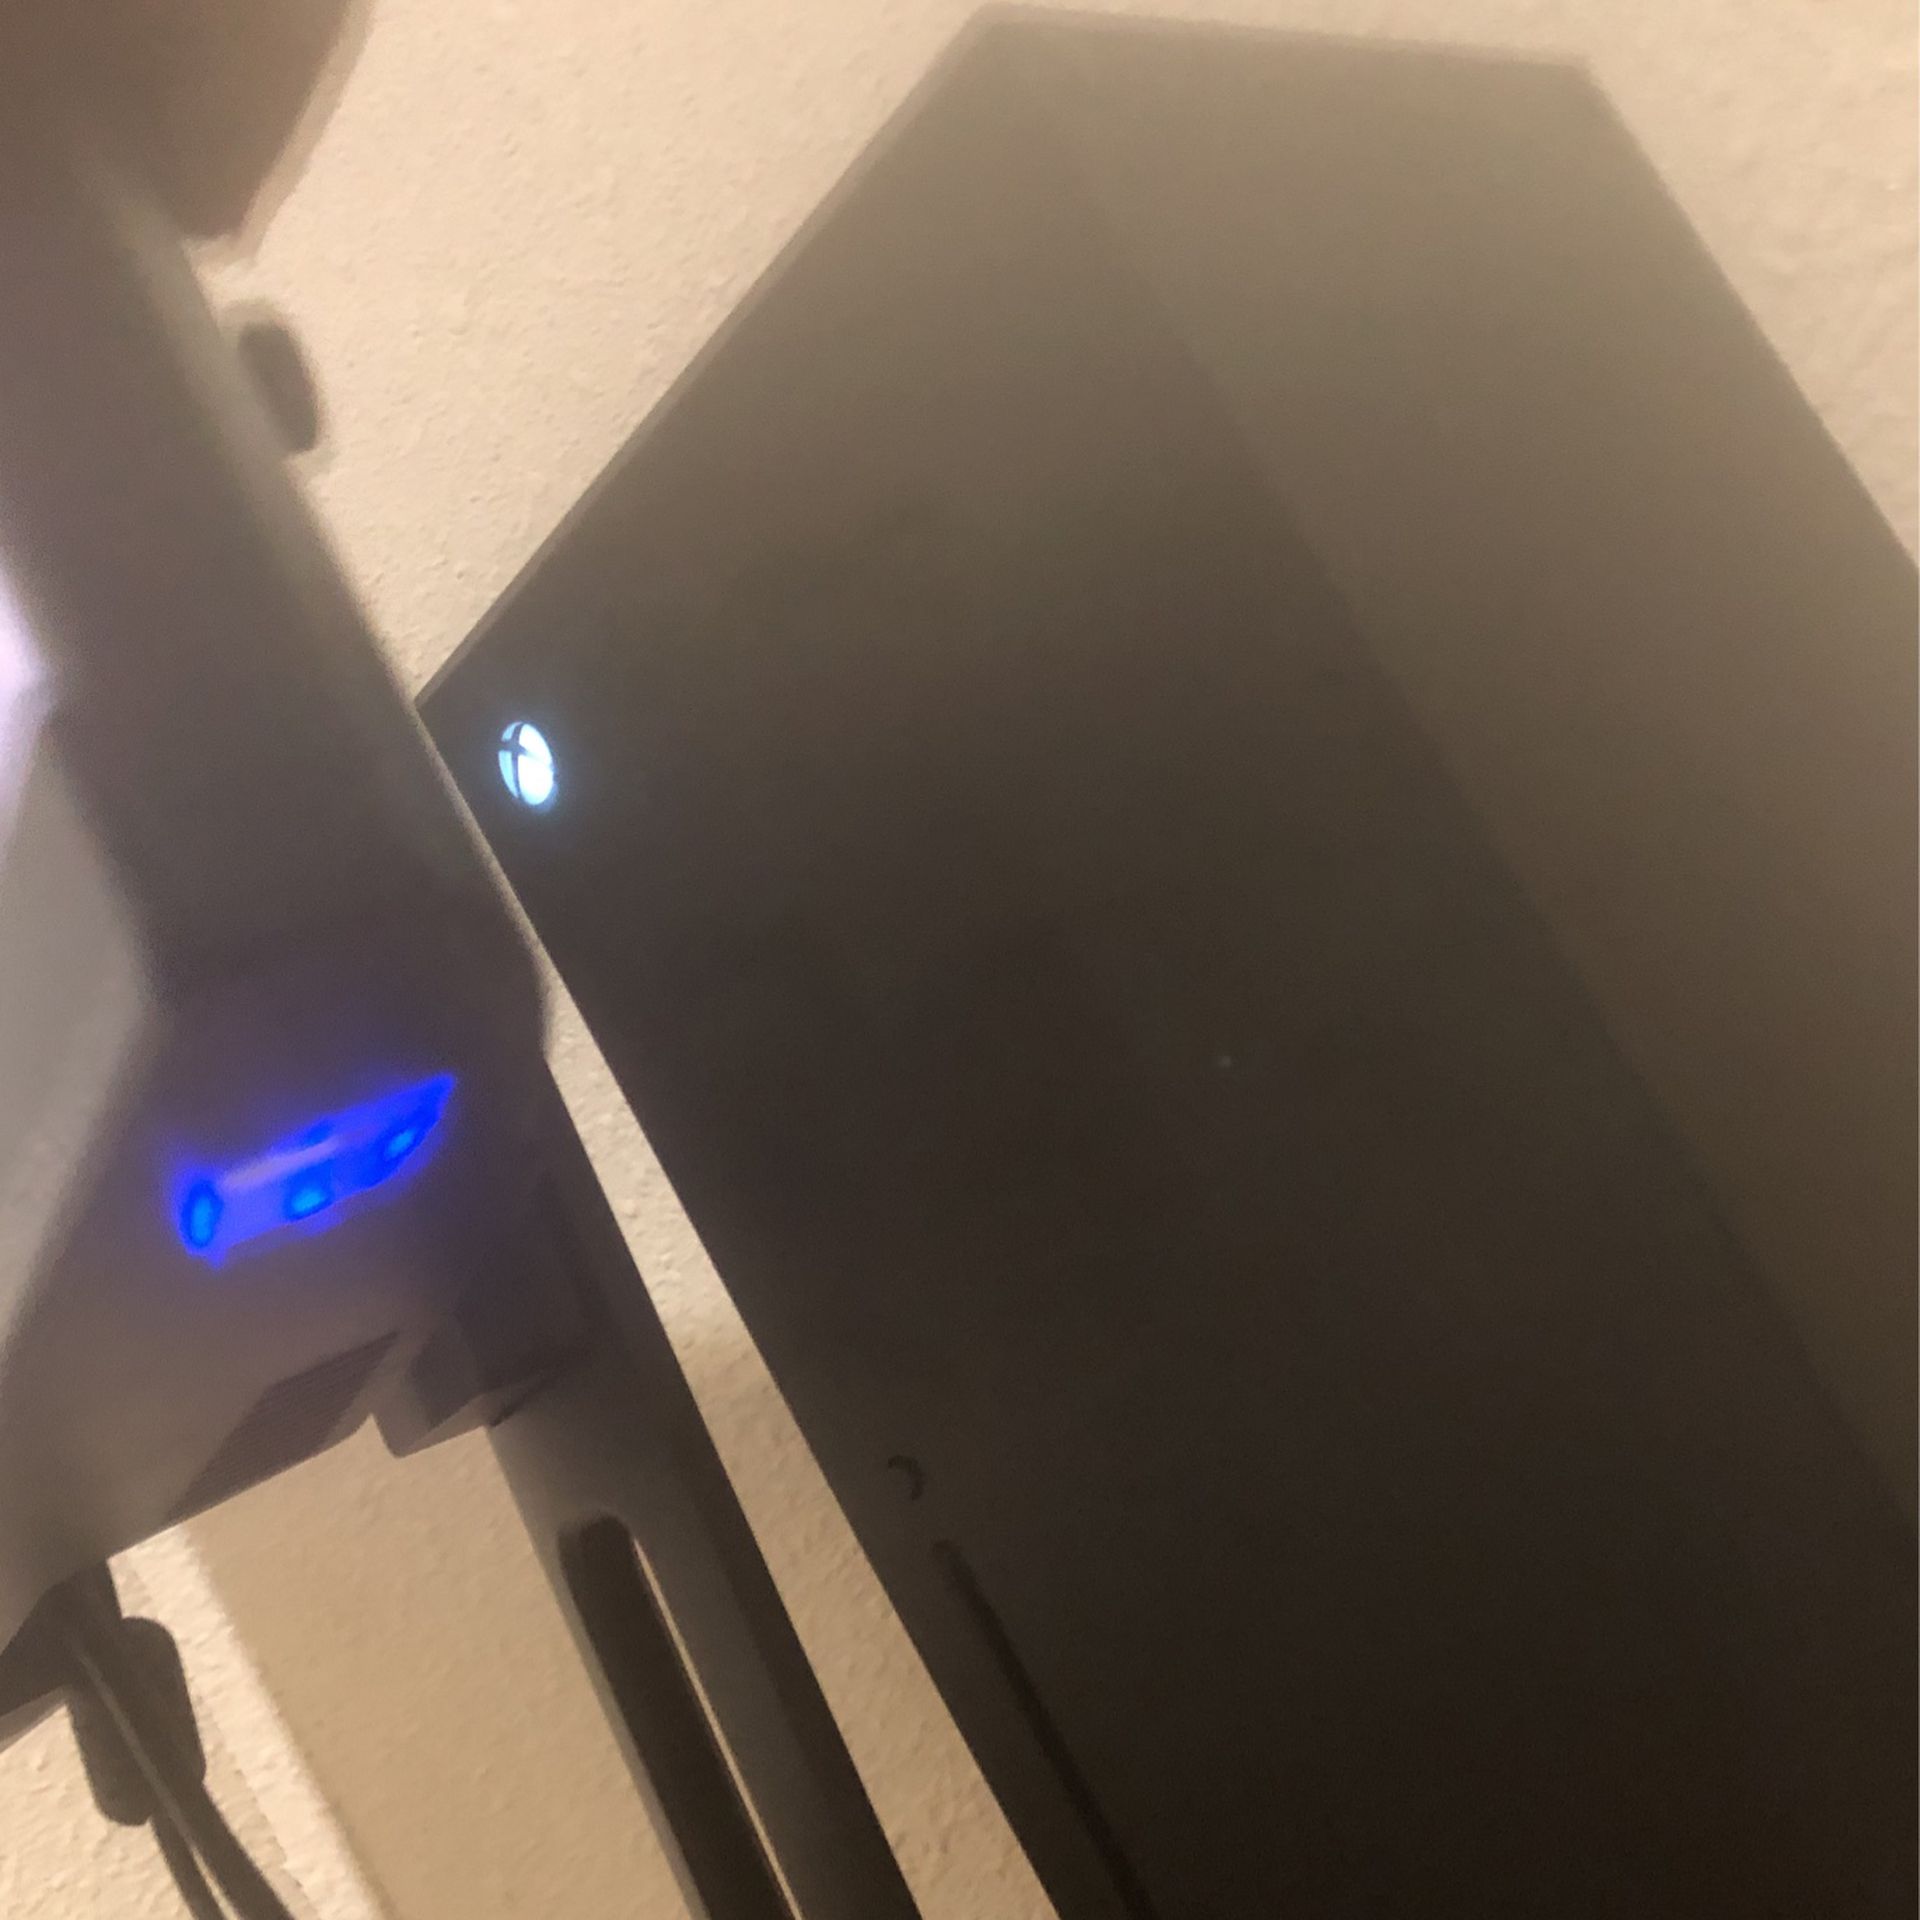 Trade xbox series x for a ps5 